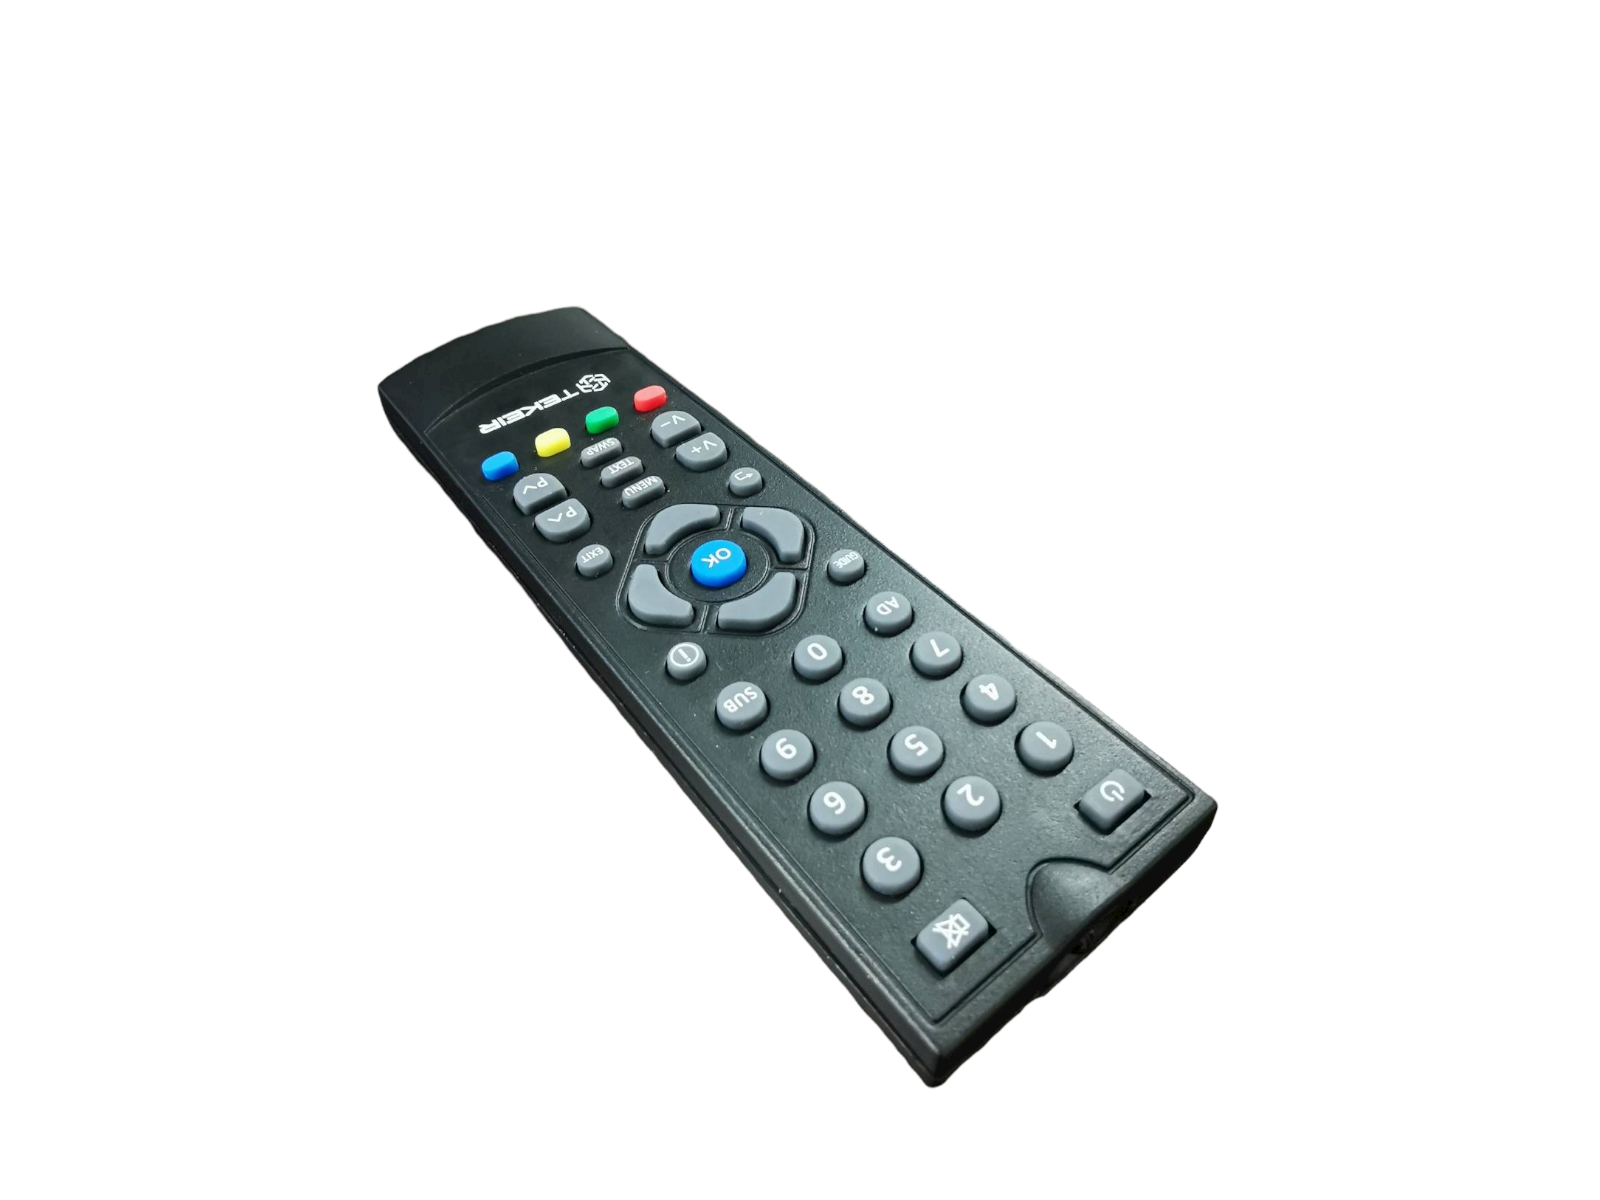 Tekeir Replacement Remote Control Compatible With Manhattan SX Freesat HD